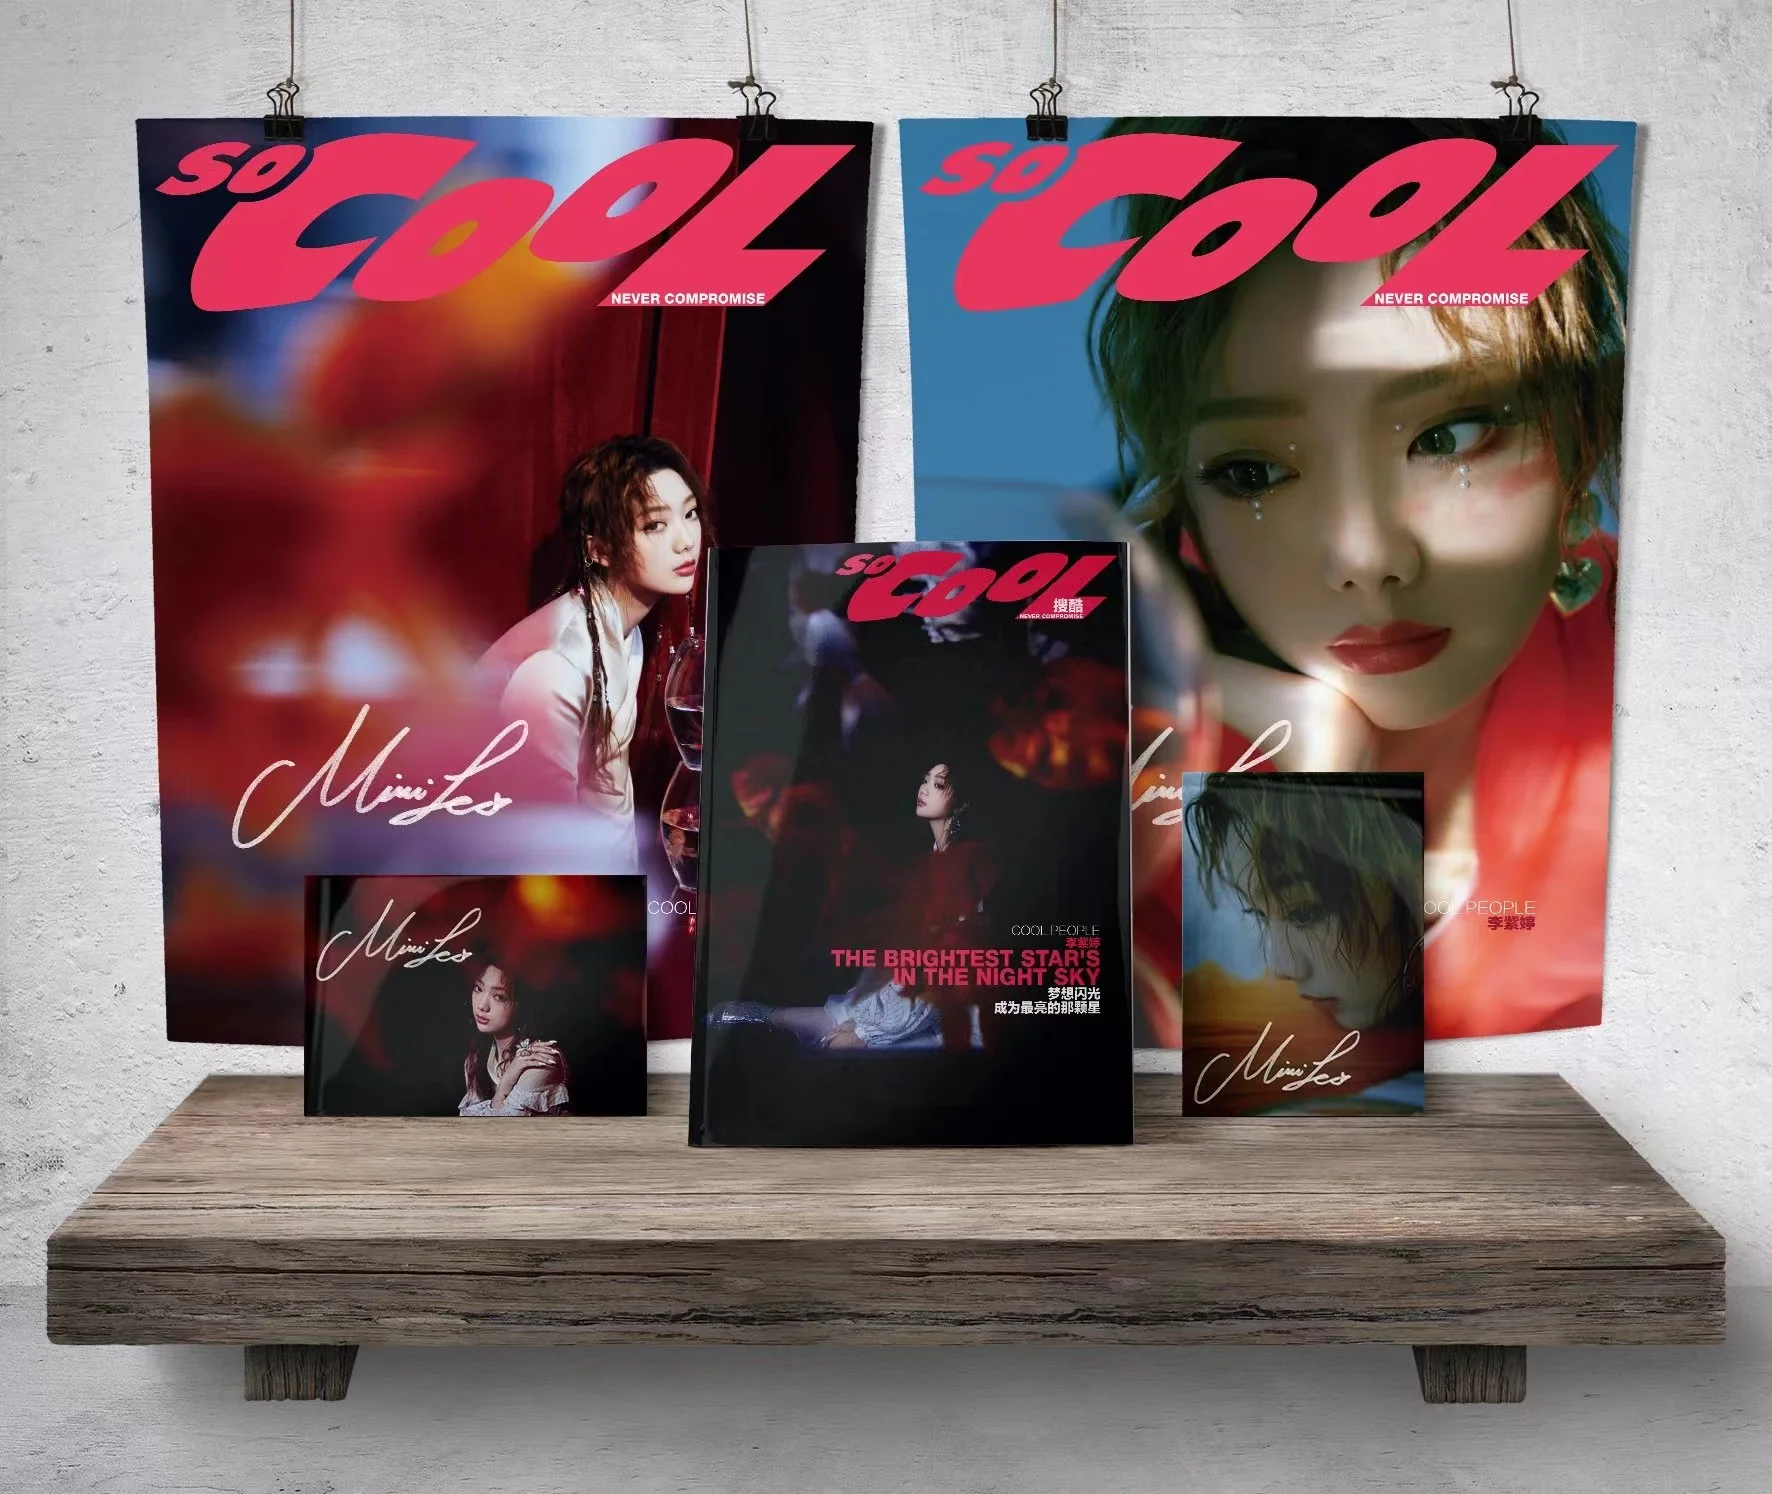 

2022 New Arrival Chinese Star Li Zi Ting Socool Magazines Fashion Book Picture Books Photos Interview Book